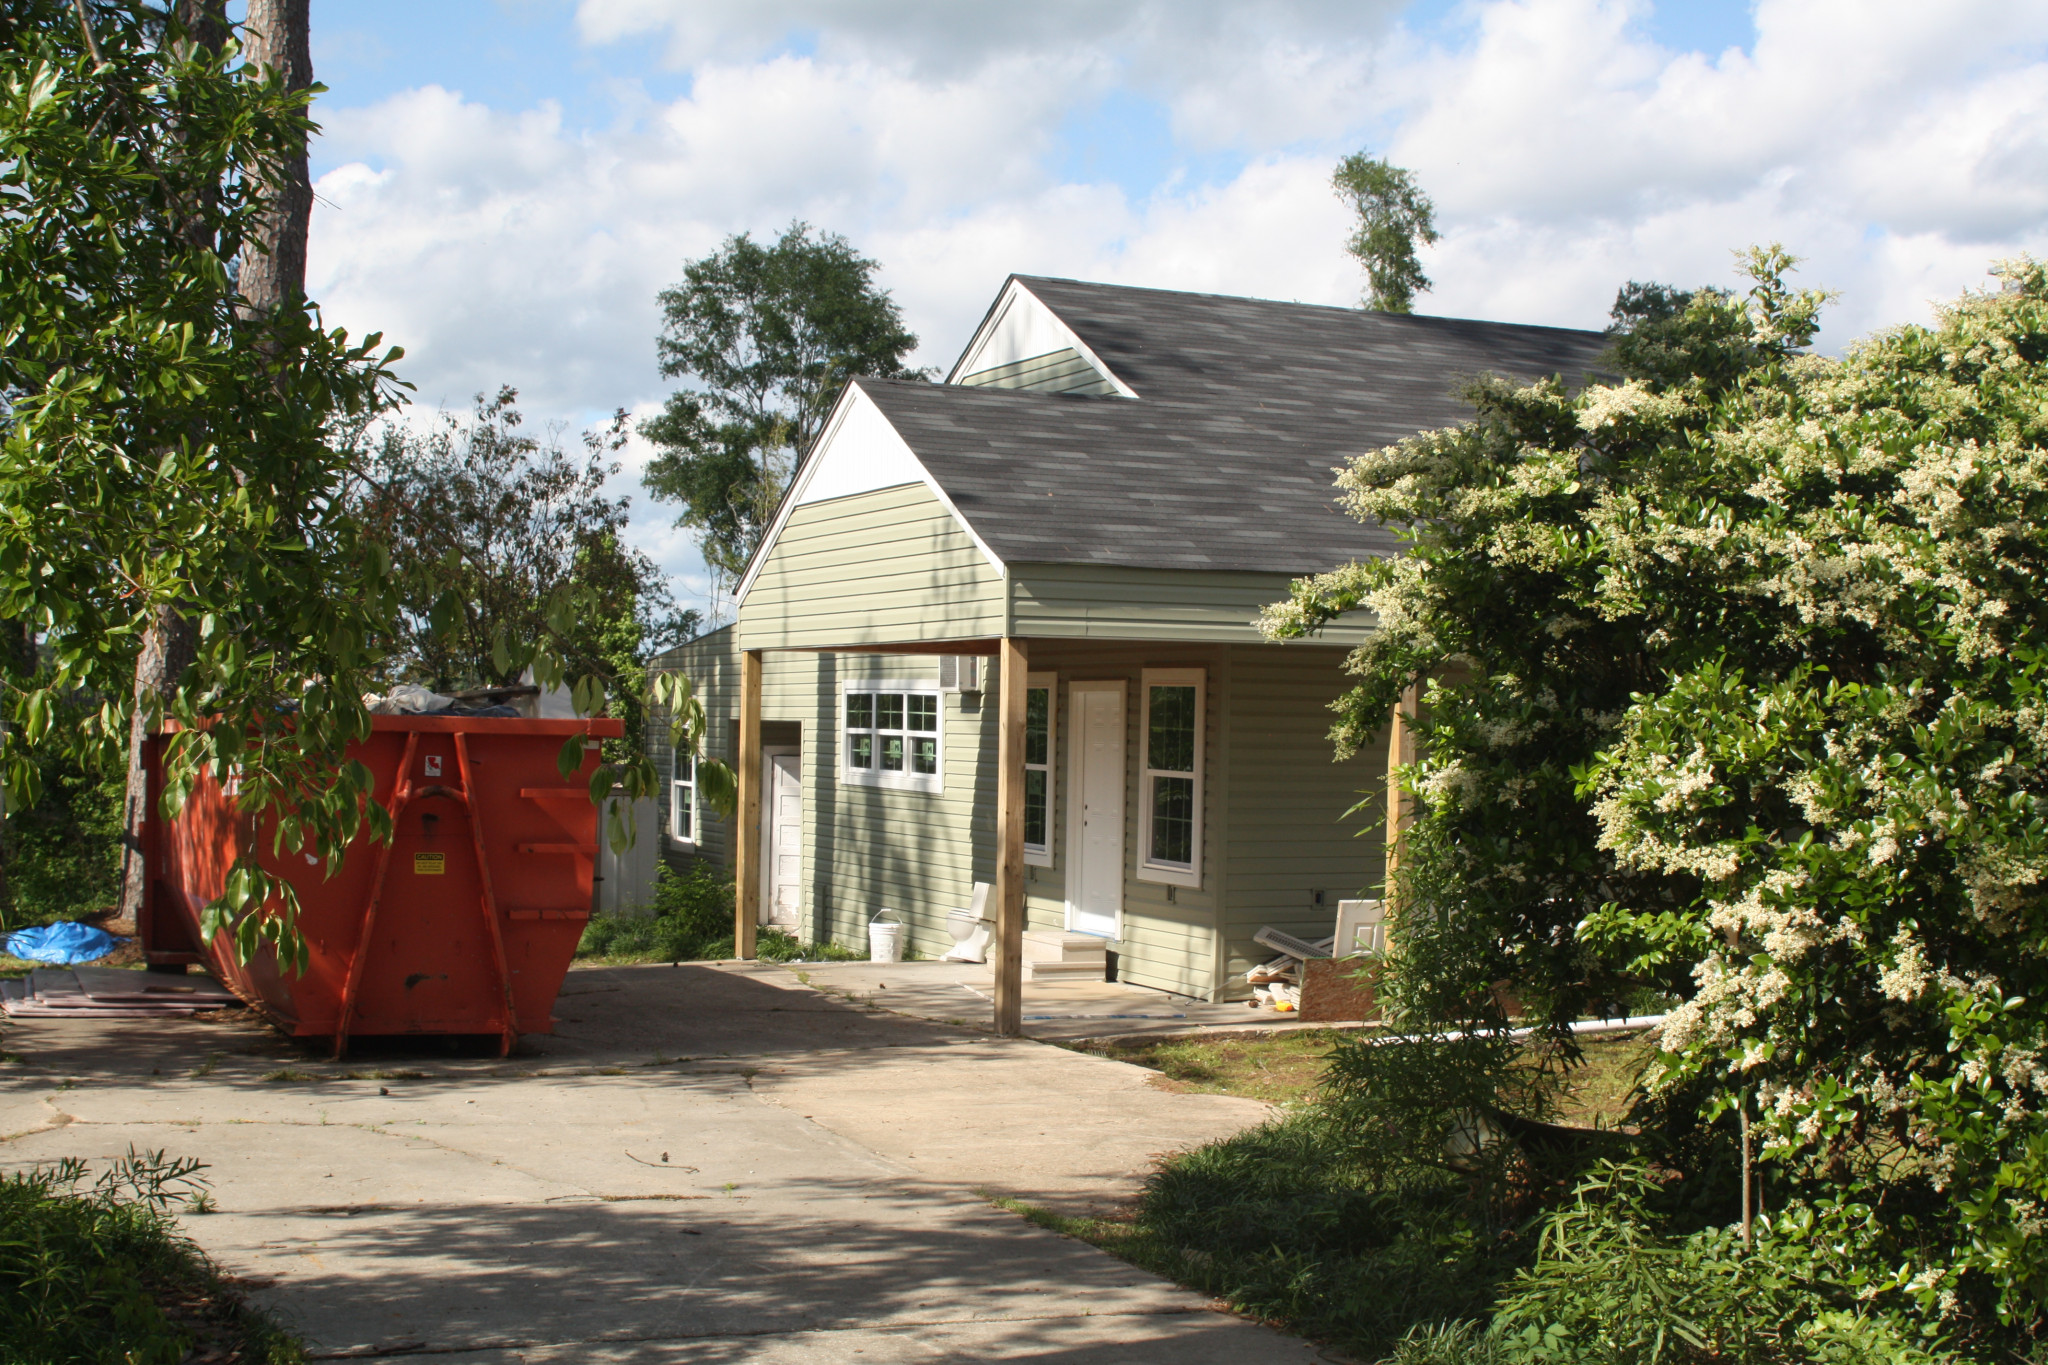 The same Westwood Drive house as it stands now while renovations continue.